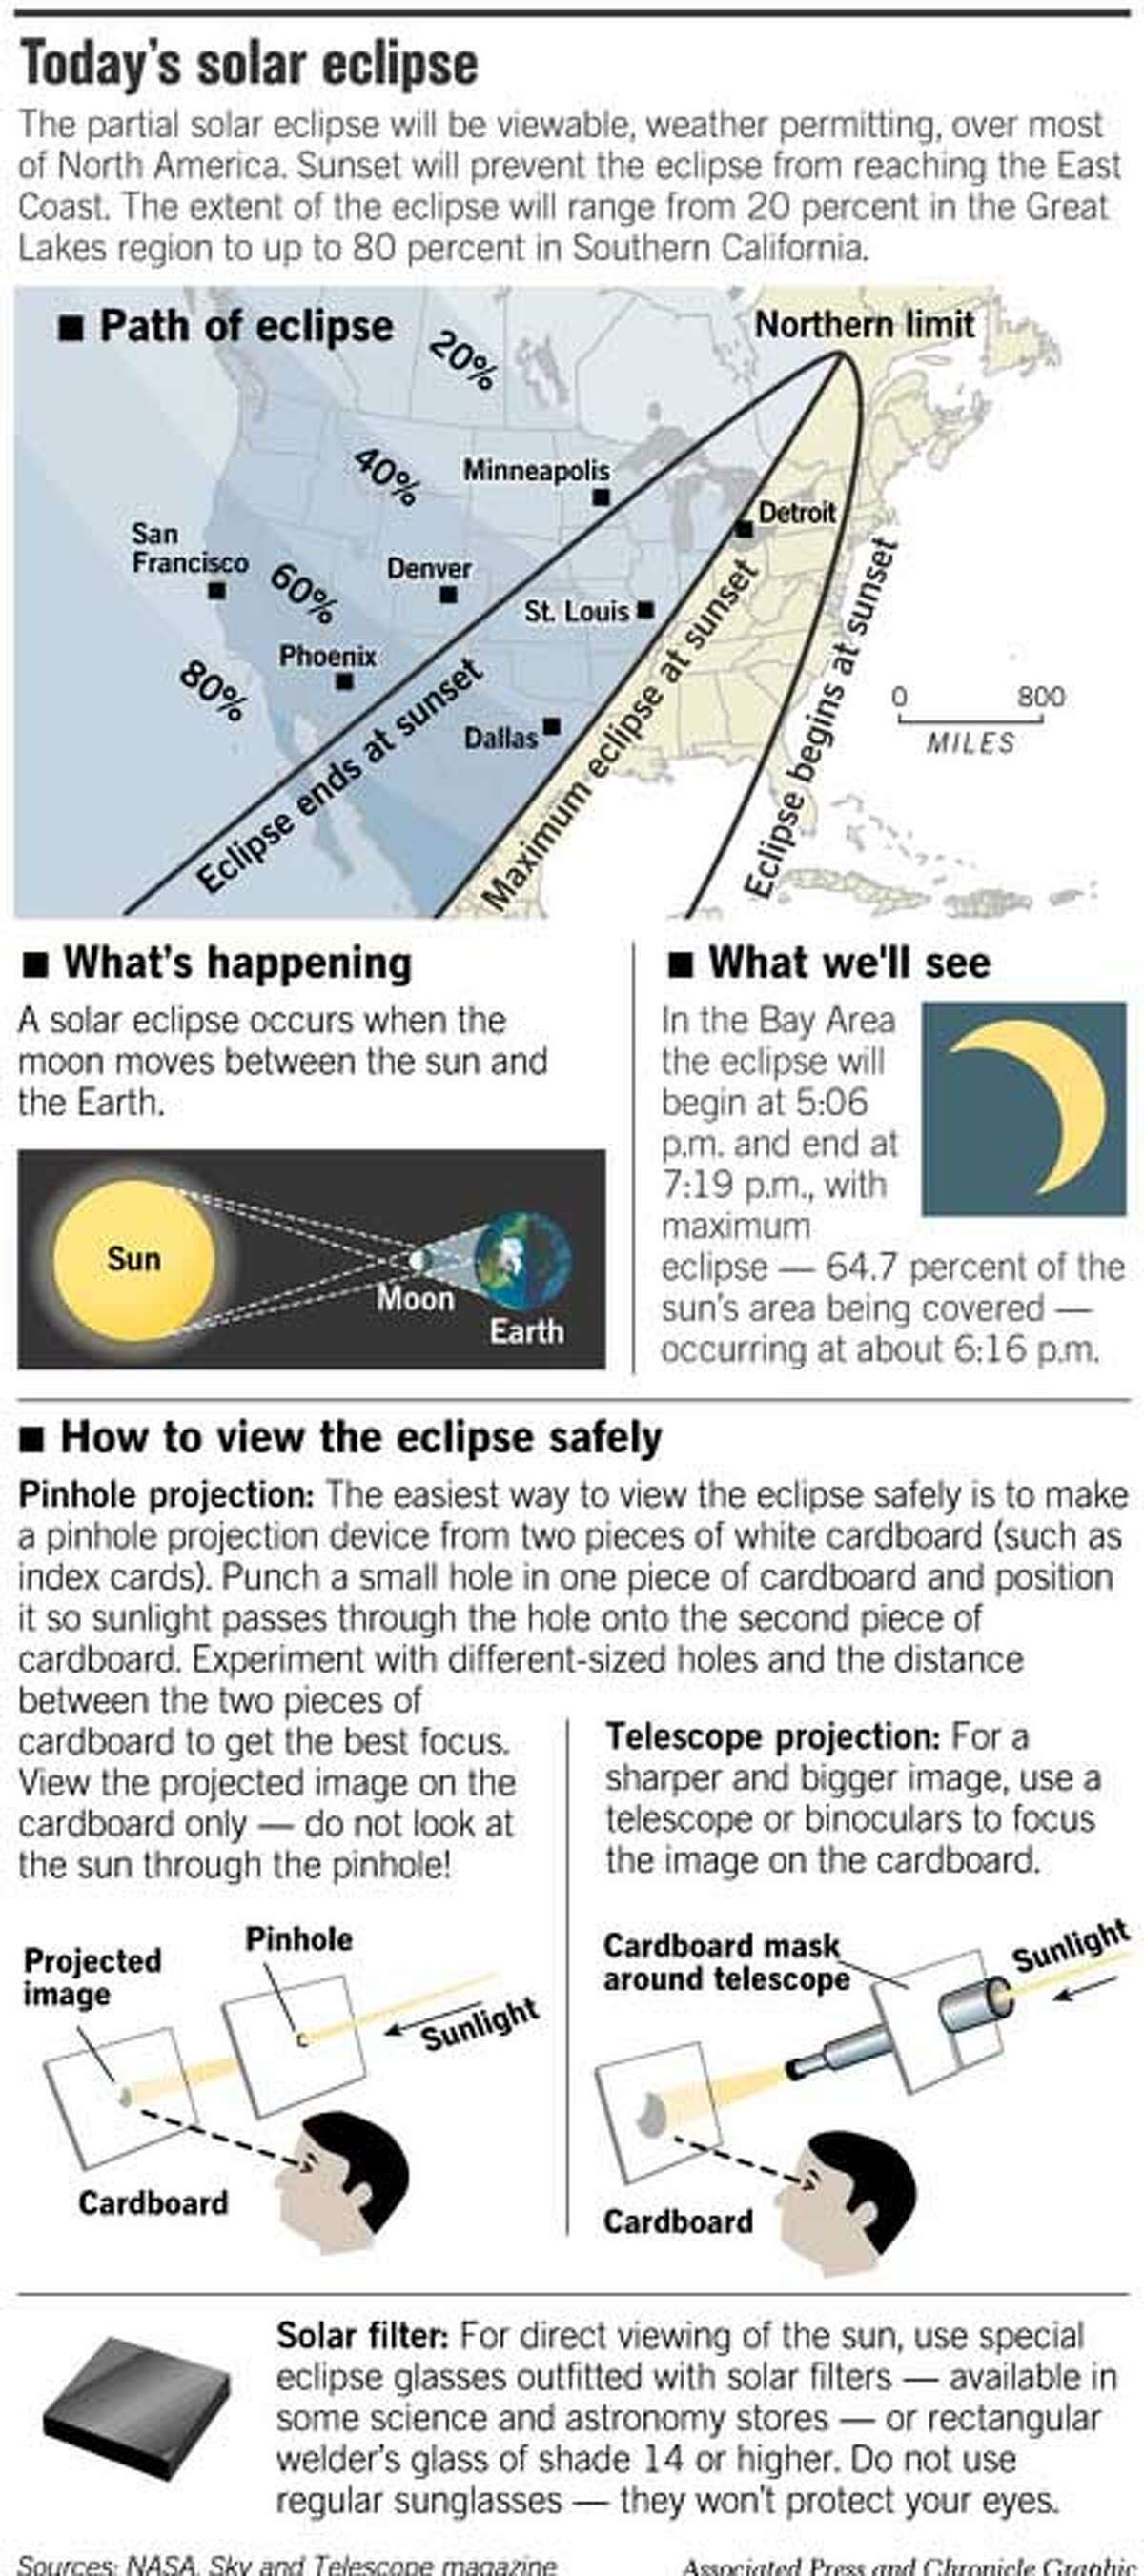 Today's Solar Eclipse. Associated Press and Chronicle Graphic